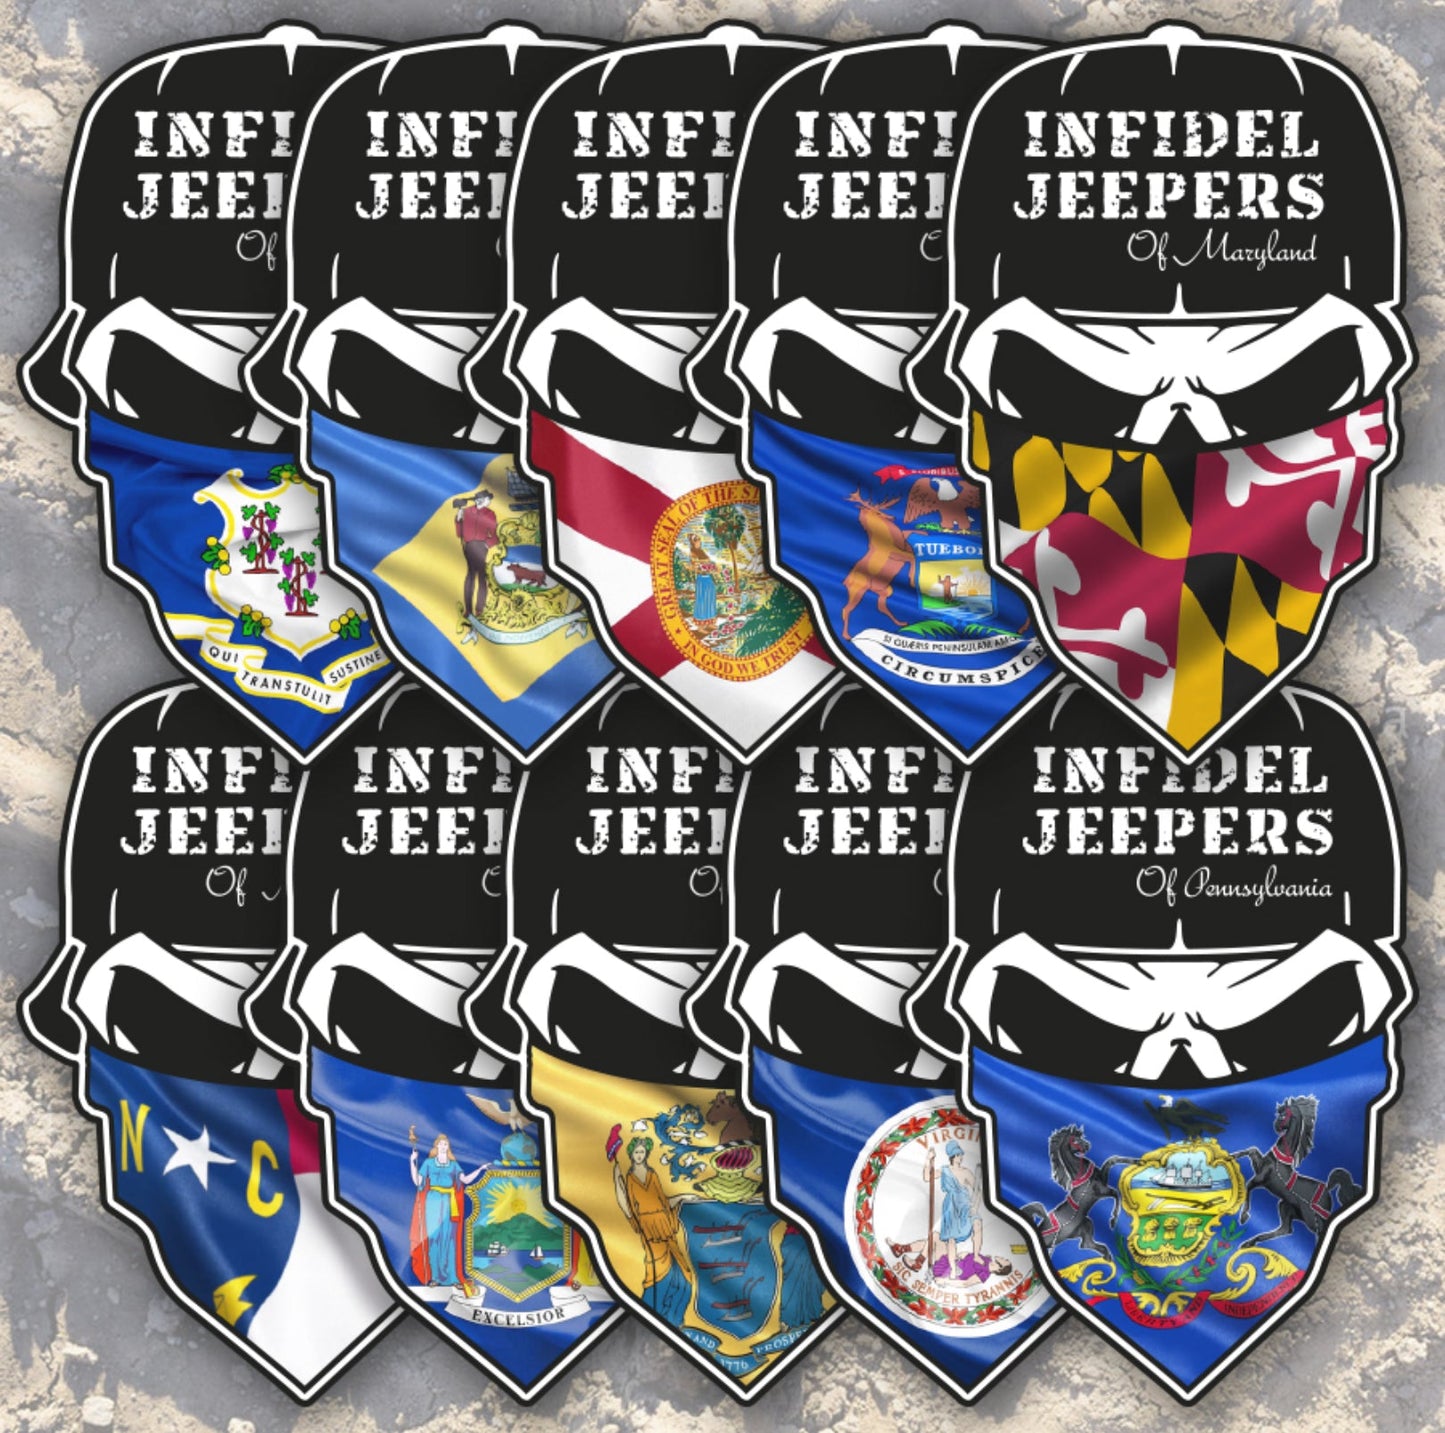 IJ CHAPTER DECALS (4”H x 2.5”W)